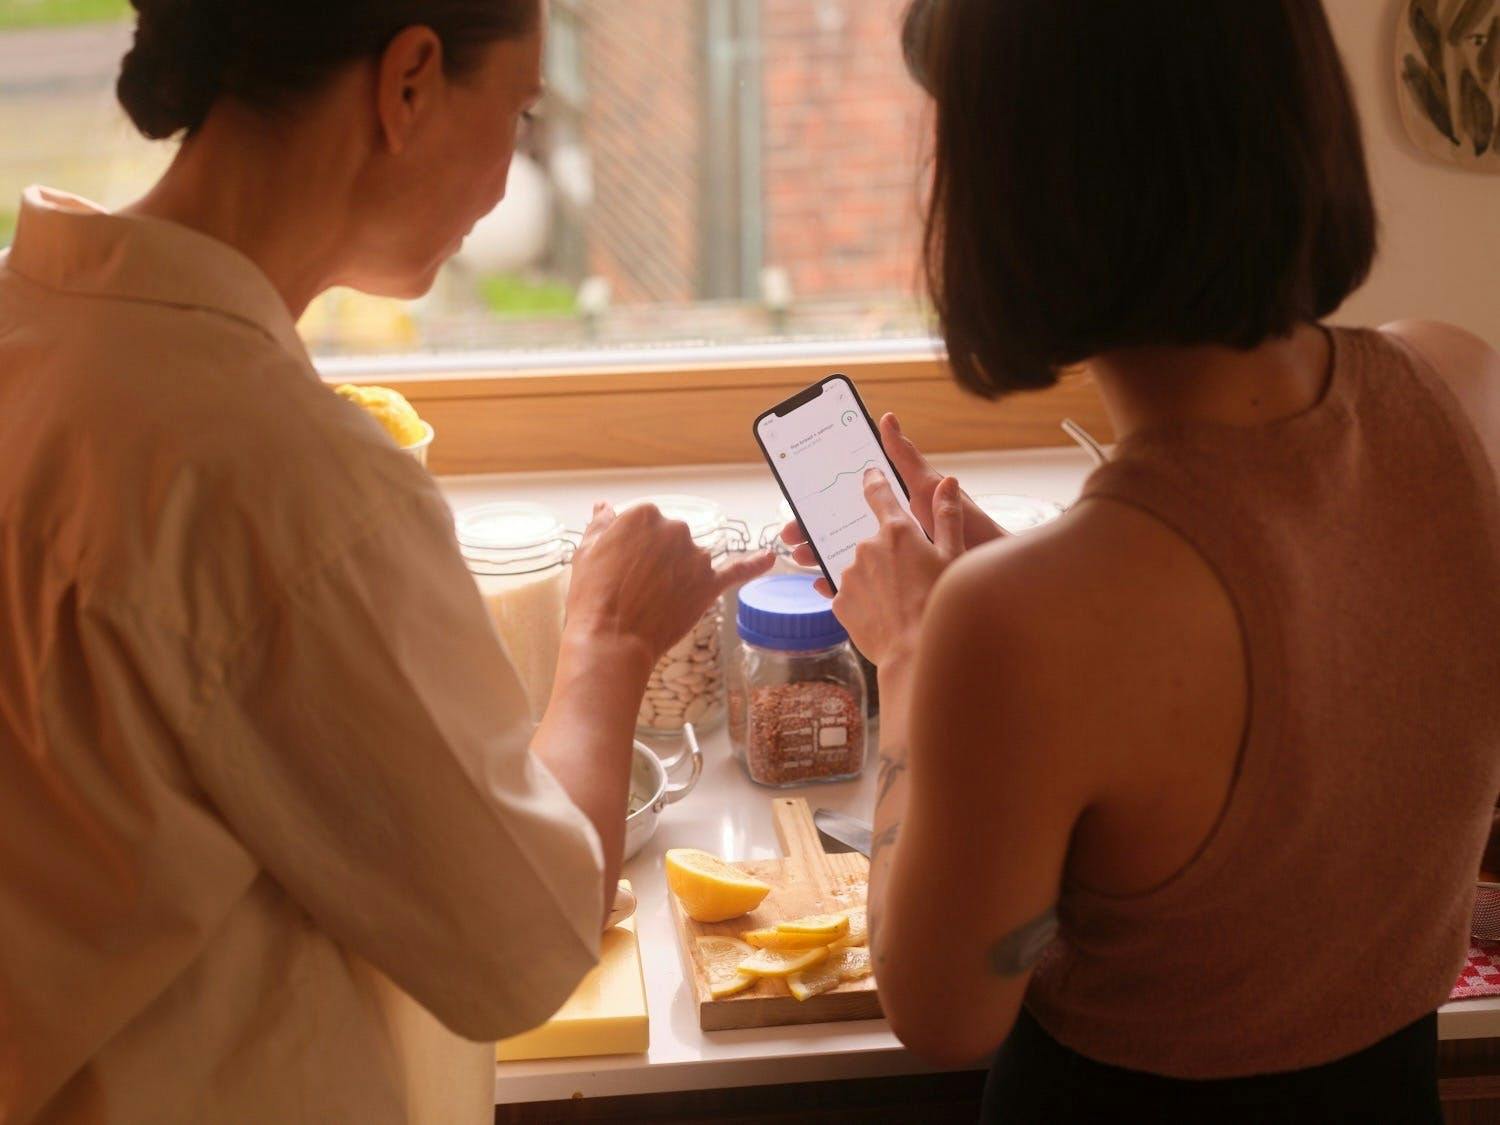 two women standing over a kitchen counter and studying data on a phone screen